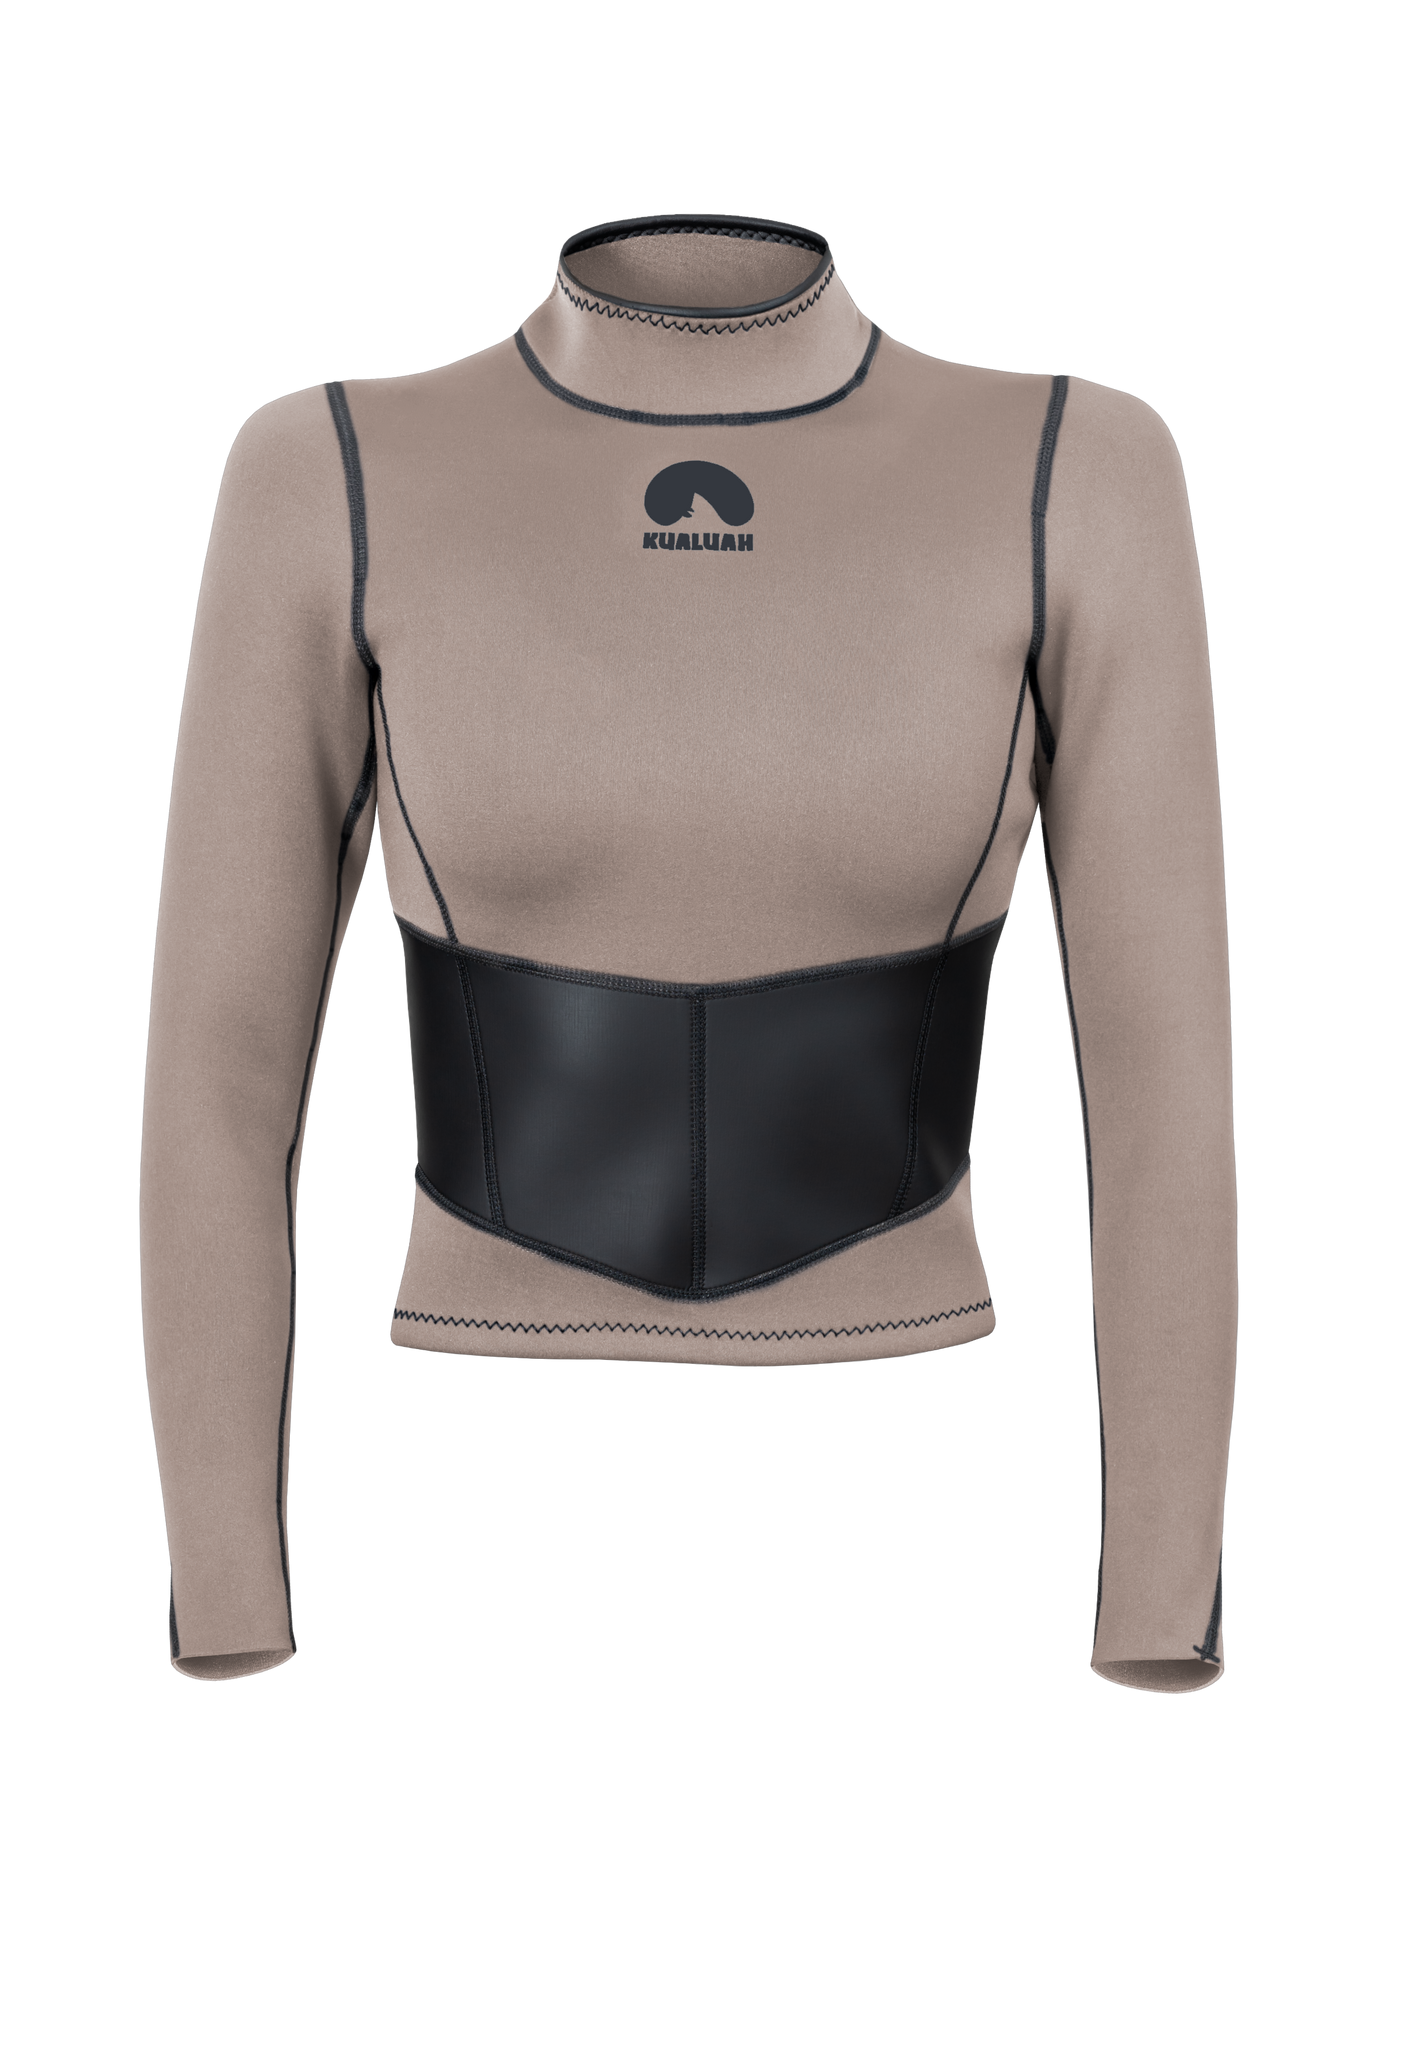 Chic and versatile sand brown Kualuah Aria neoprene top - perfect for any ocean adventures. Made with premium and eco-friendly materials for comfort and style. Get yours now.